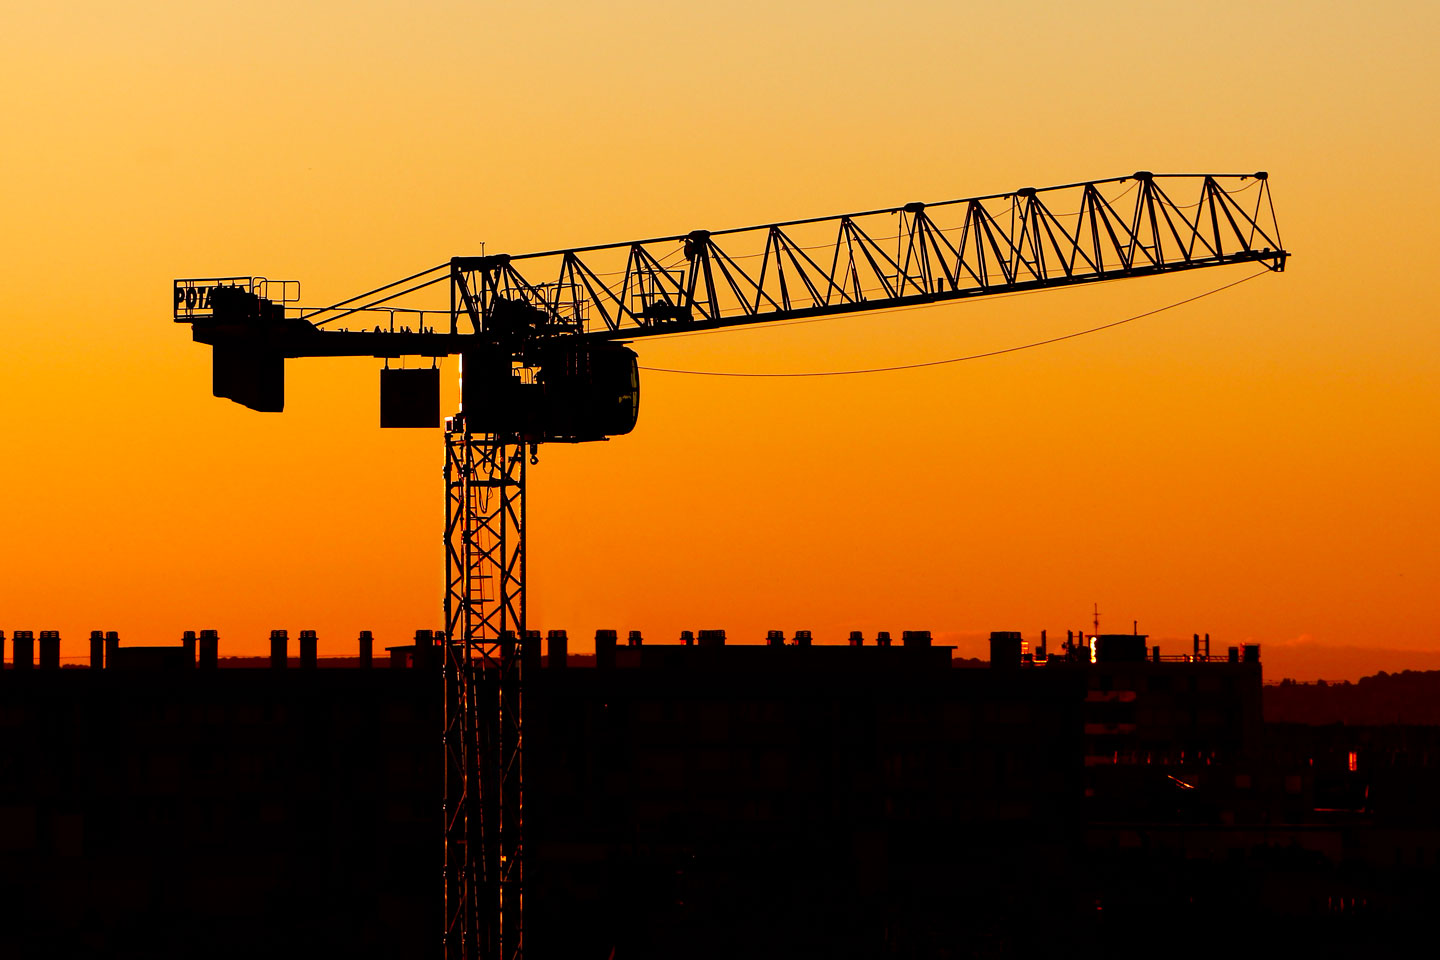 French Photographer Landscape Photography Tower Crane in the Sunset 